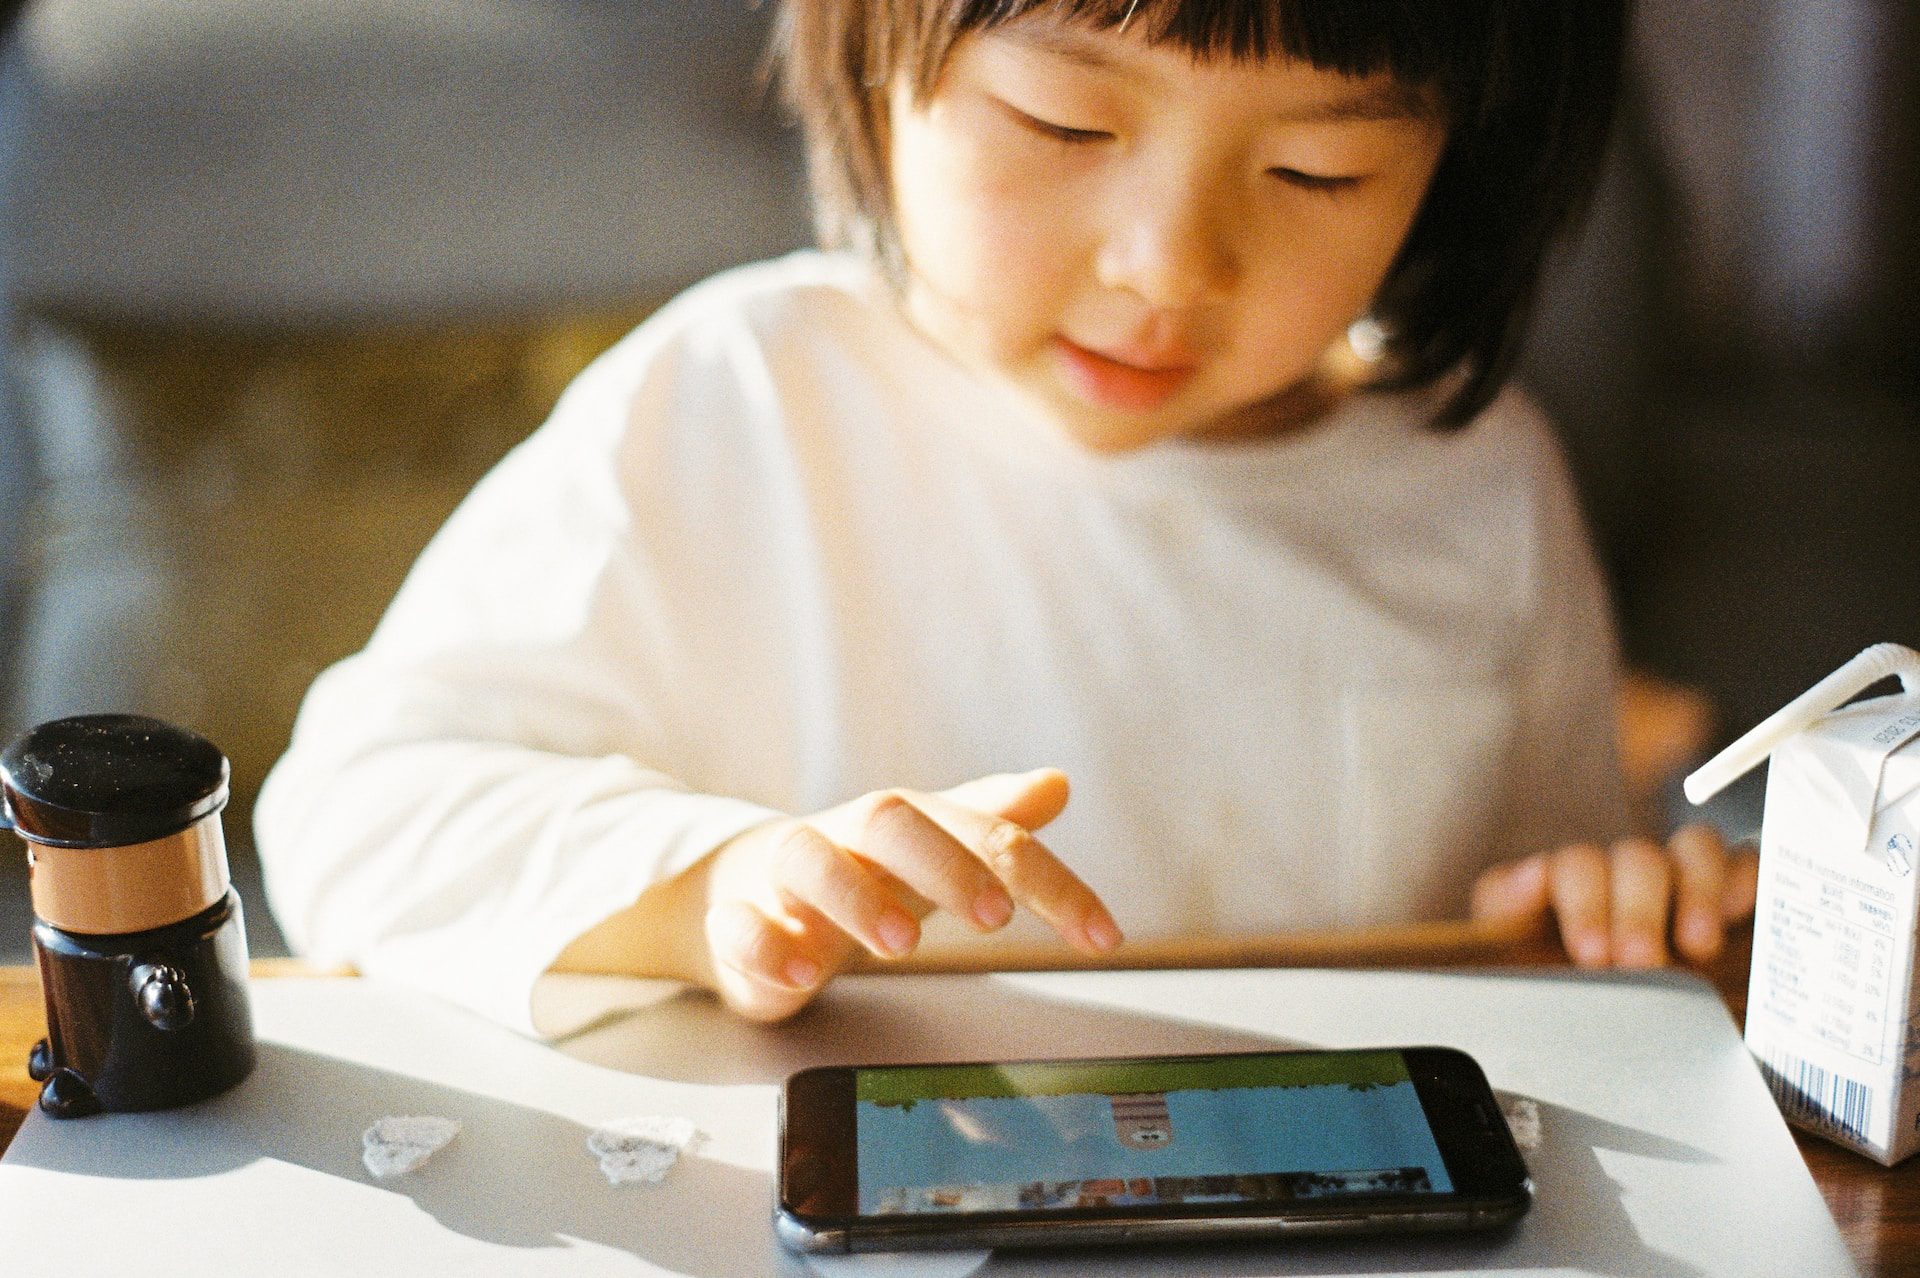 Young Asian child drinks form a juice box and plays a game on a tablet.